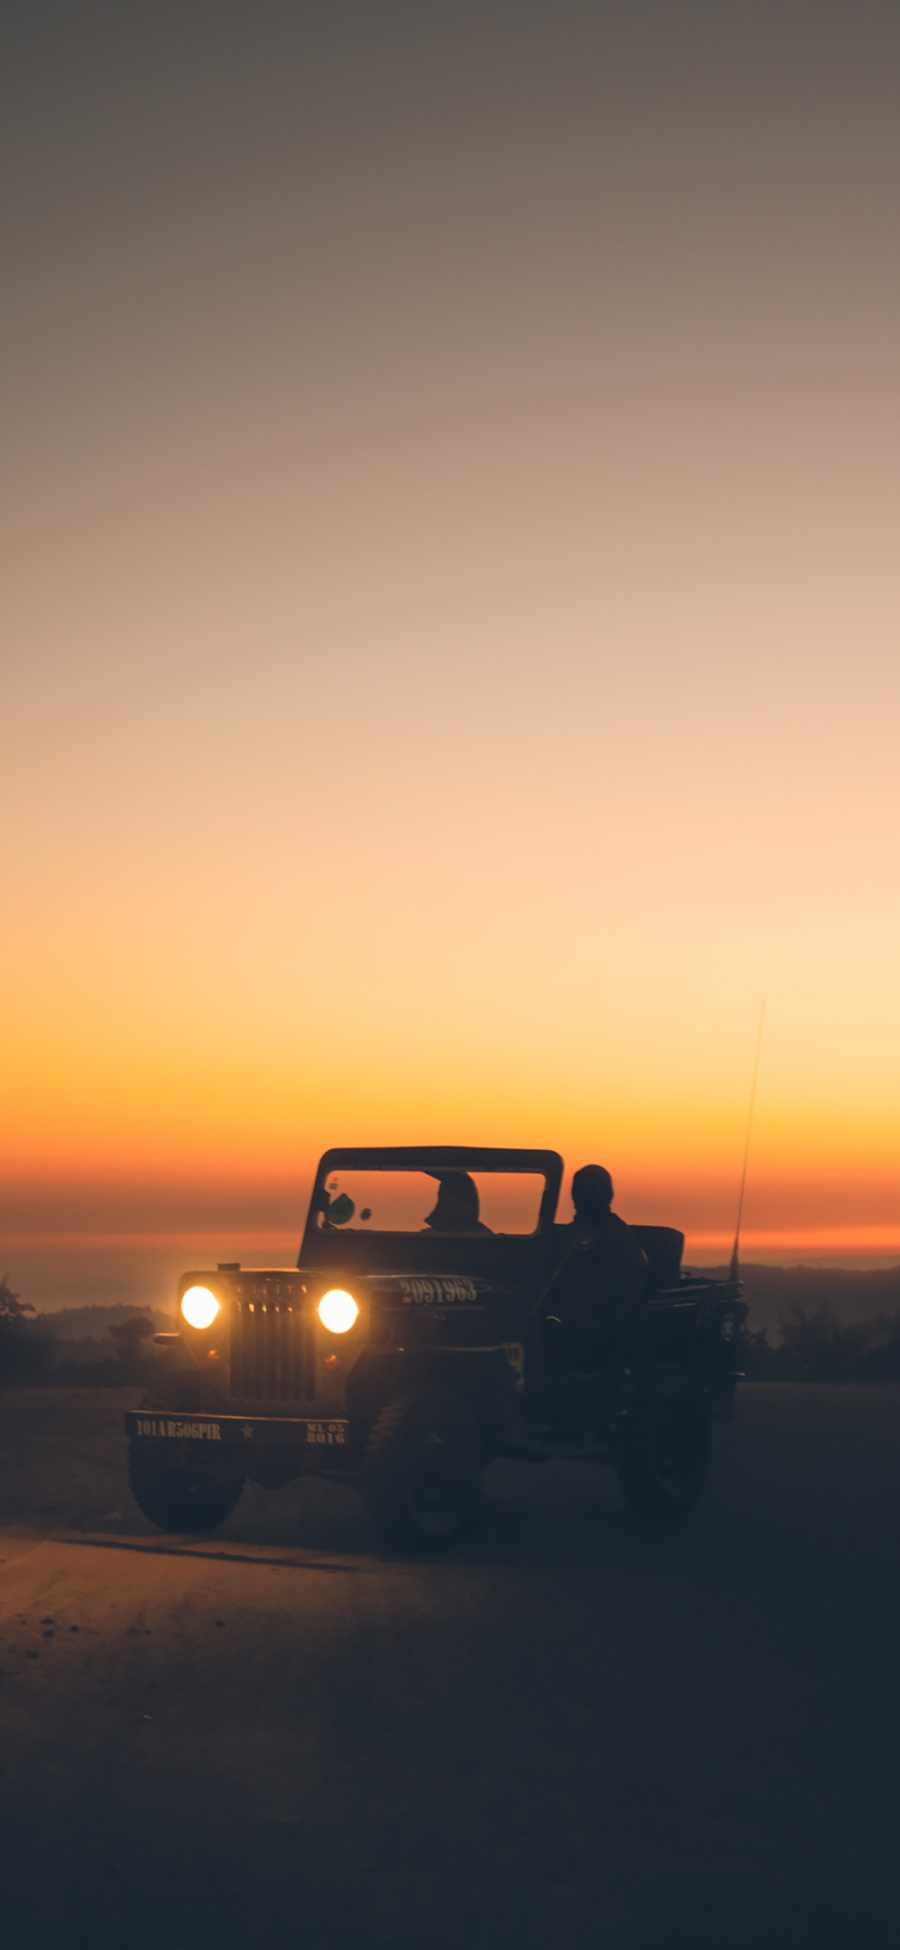 Download wallpaper 938x1668 jeep suv car black desert sky iphone  876s6 for parallax hd background